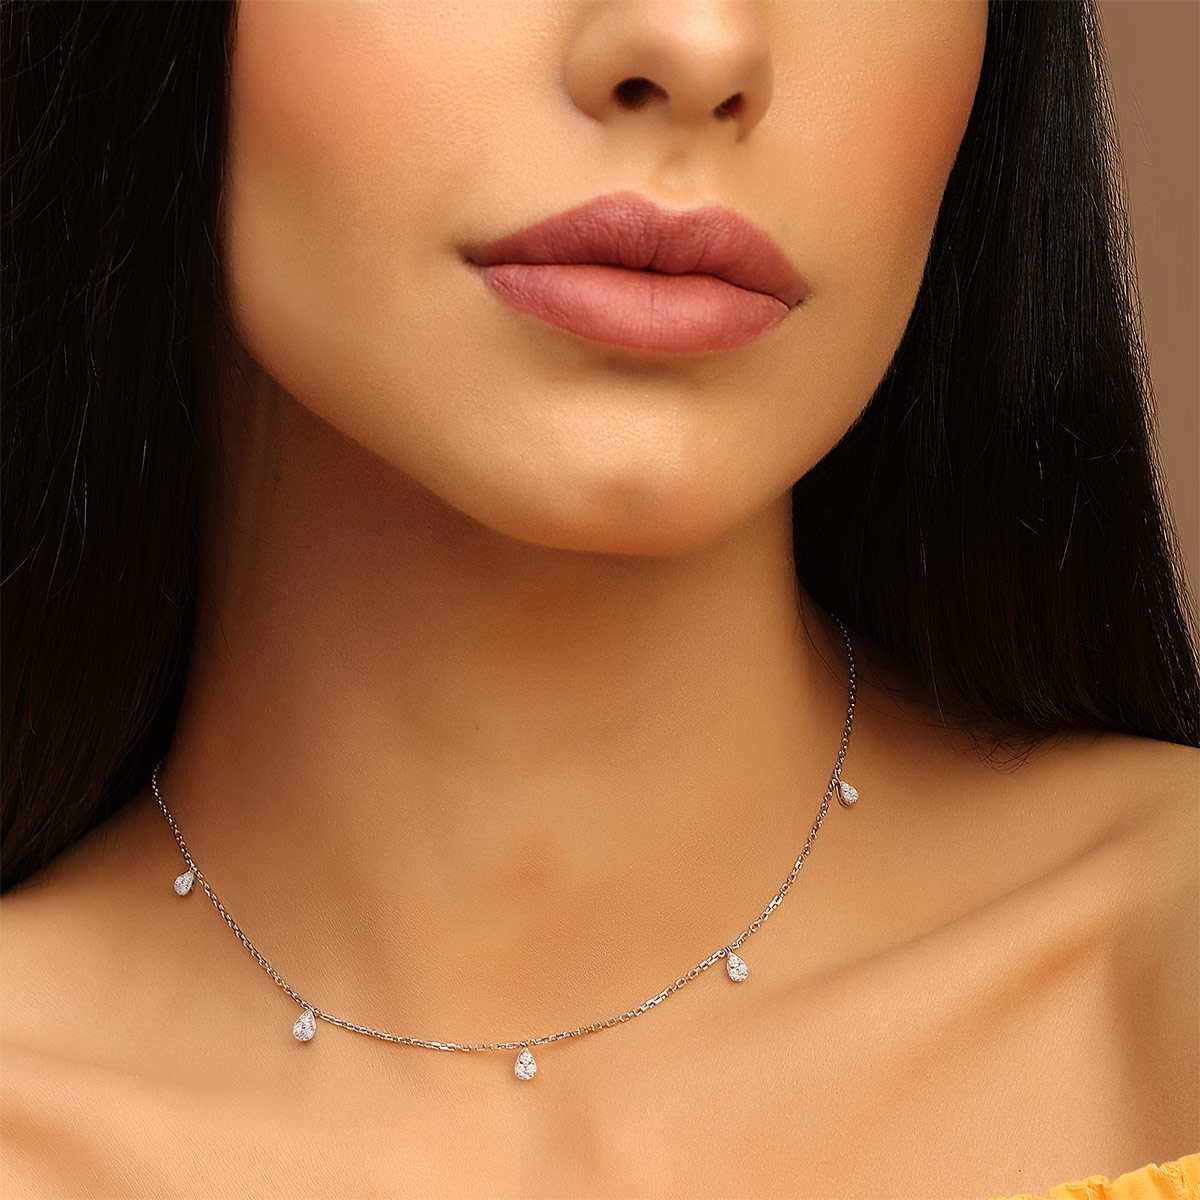 Five Pear Illusion Diamond Small Necklace In 18 K Yellow Gold From Chokers Collection